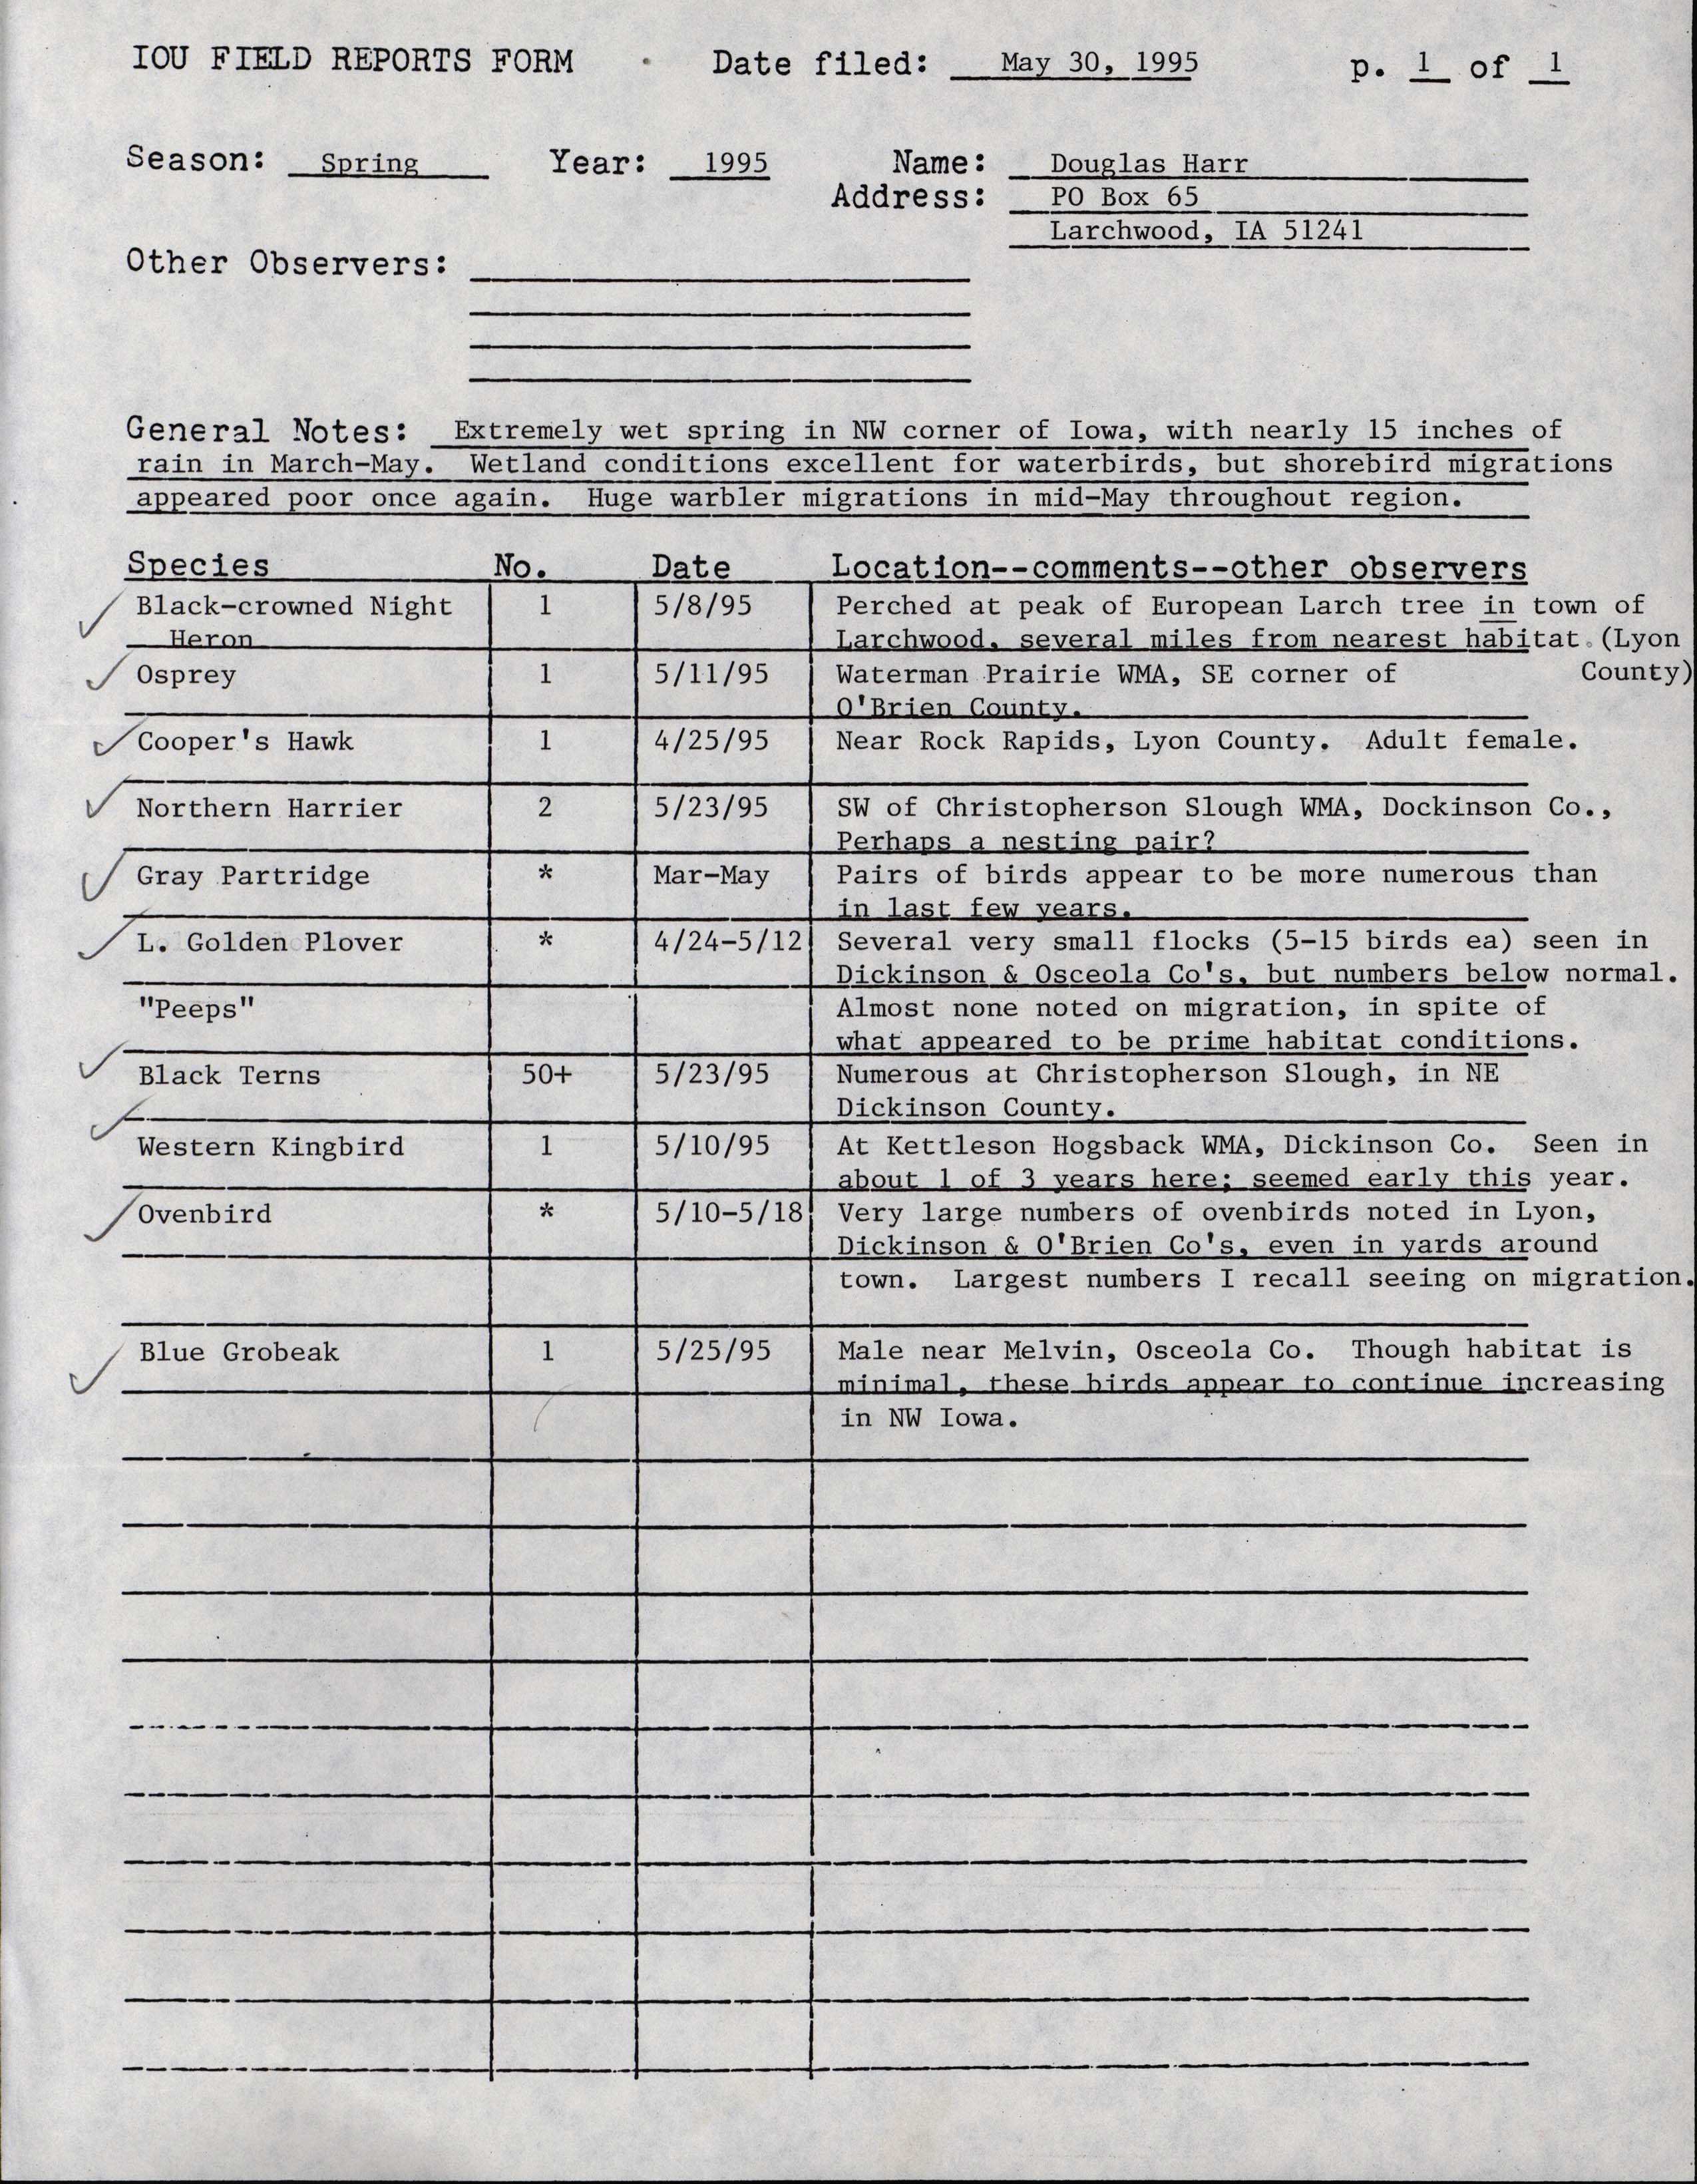 Field reports form for submitting seasonal observations of Iowa birds, spring 1995, Douglas Harr